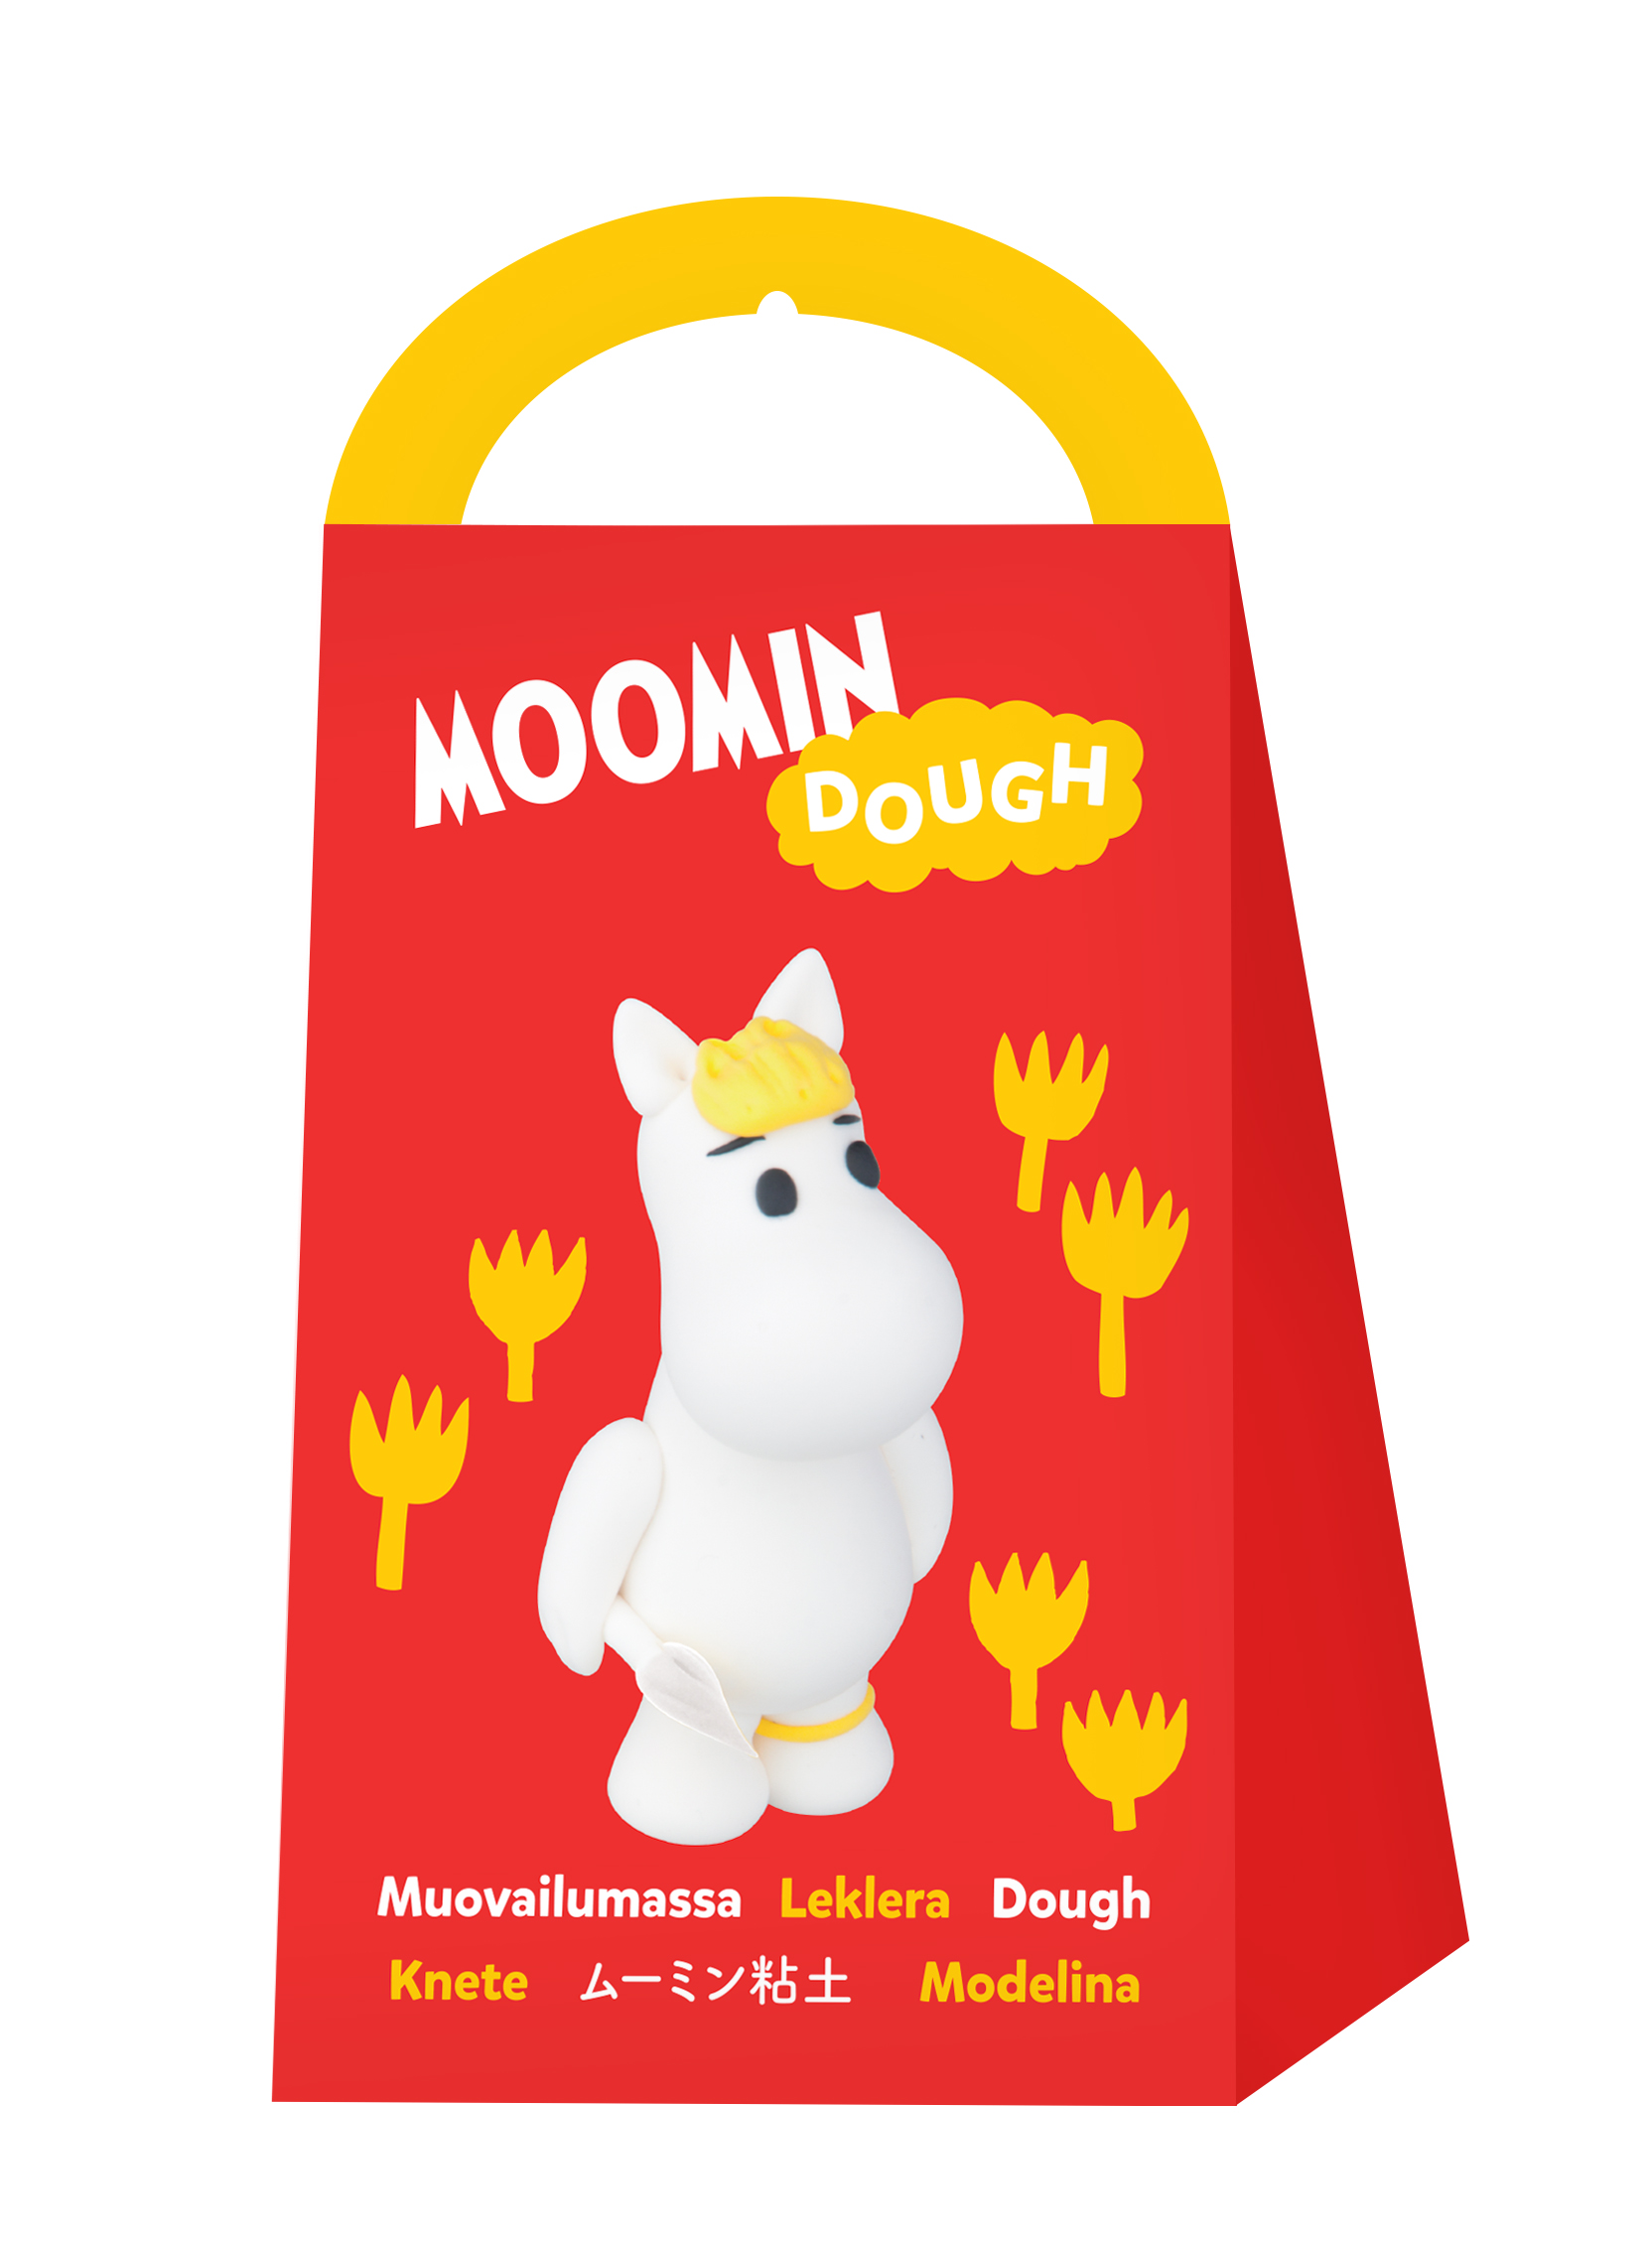 Anglo-Nordic Moomin dough Snorkmaiden